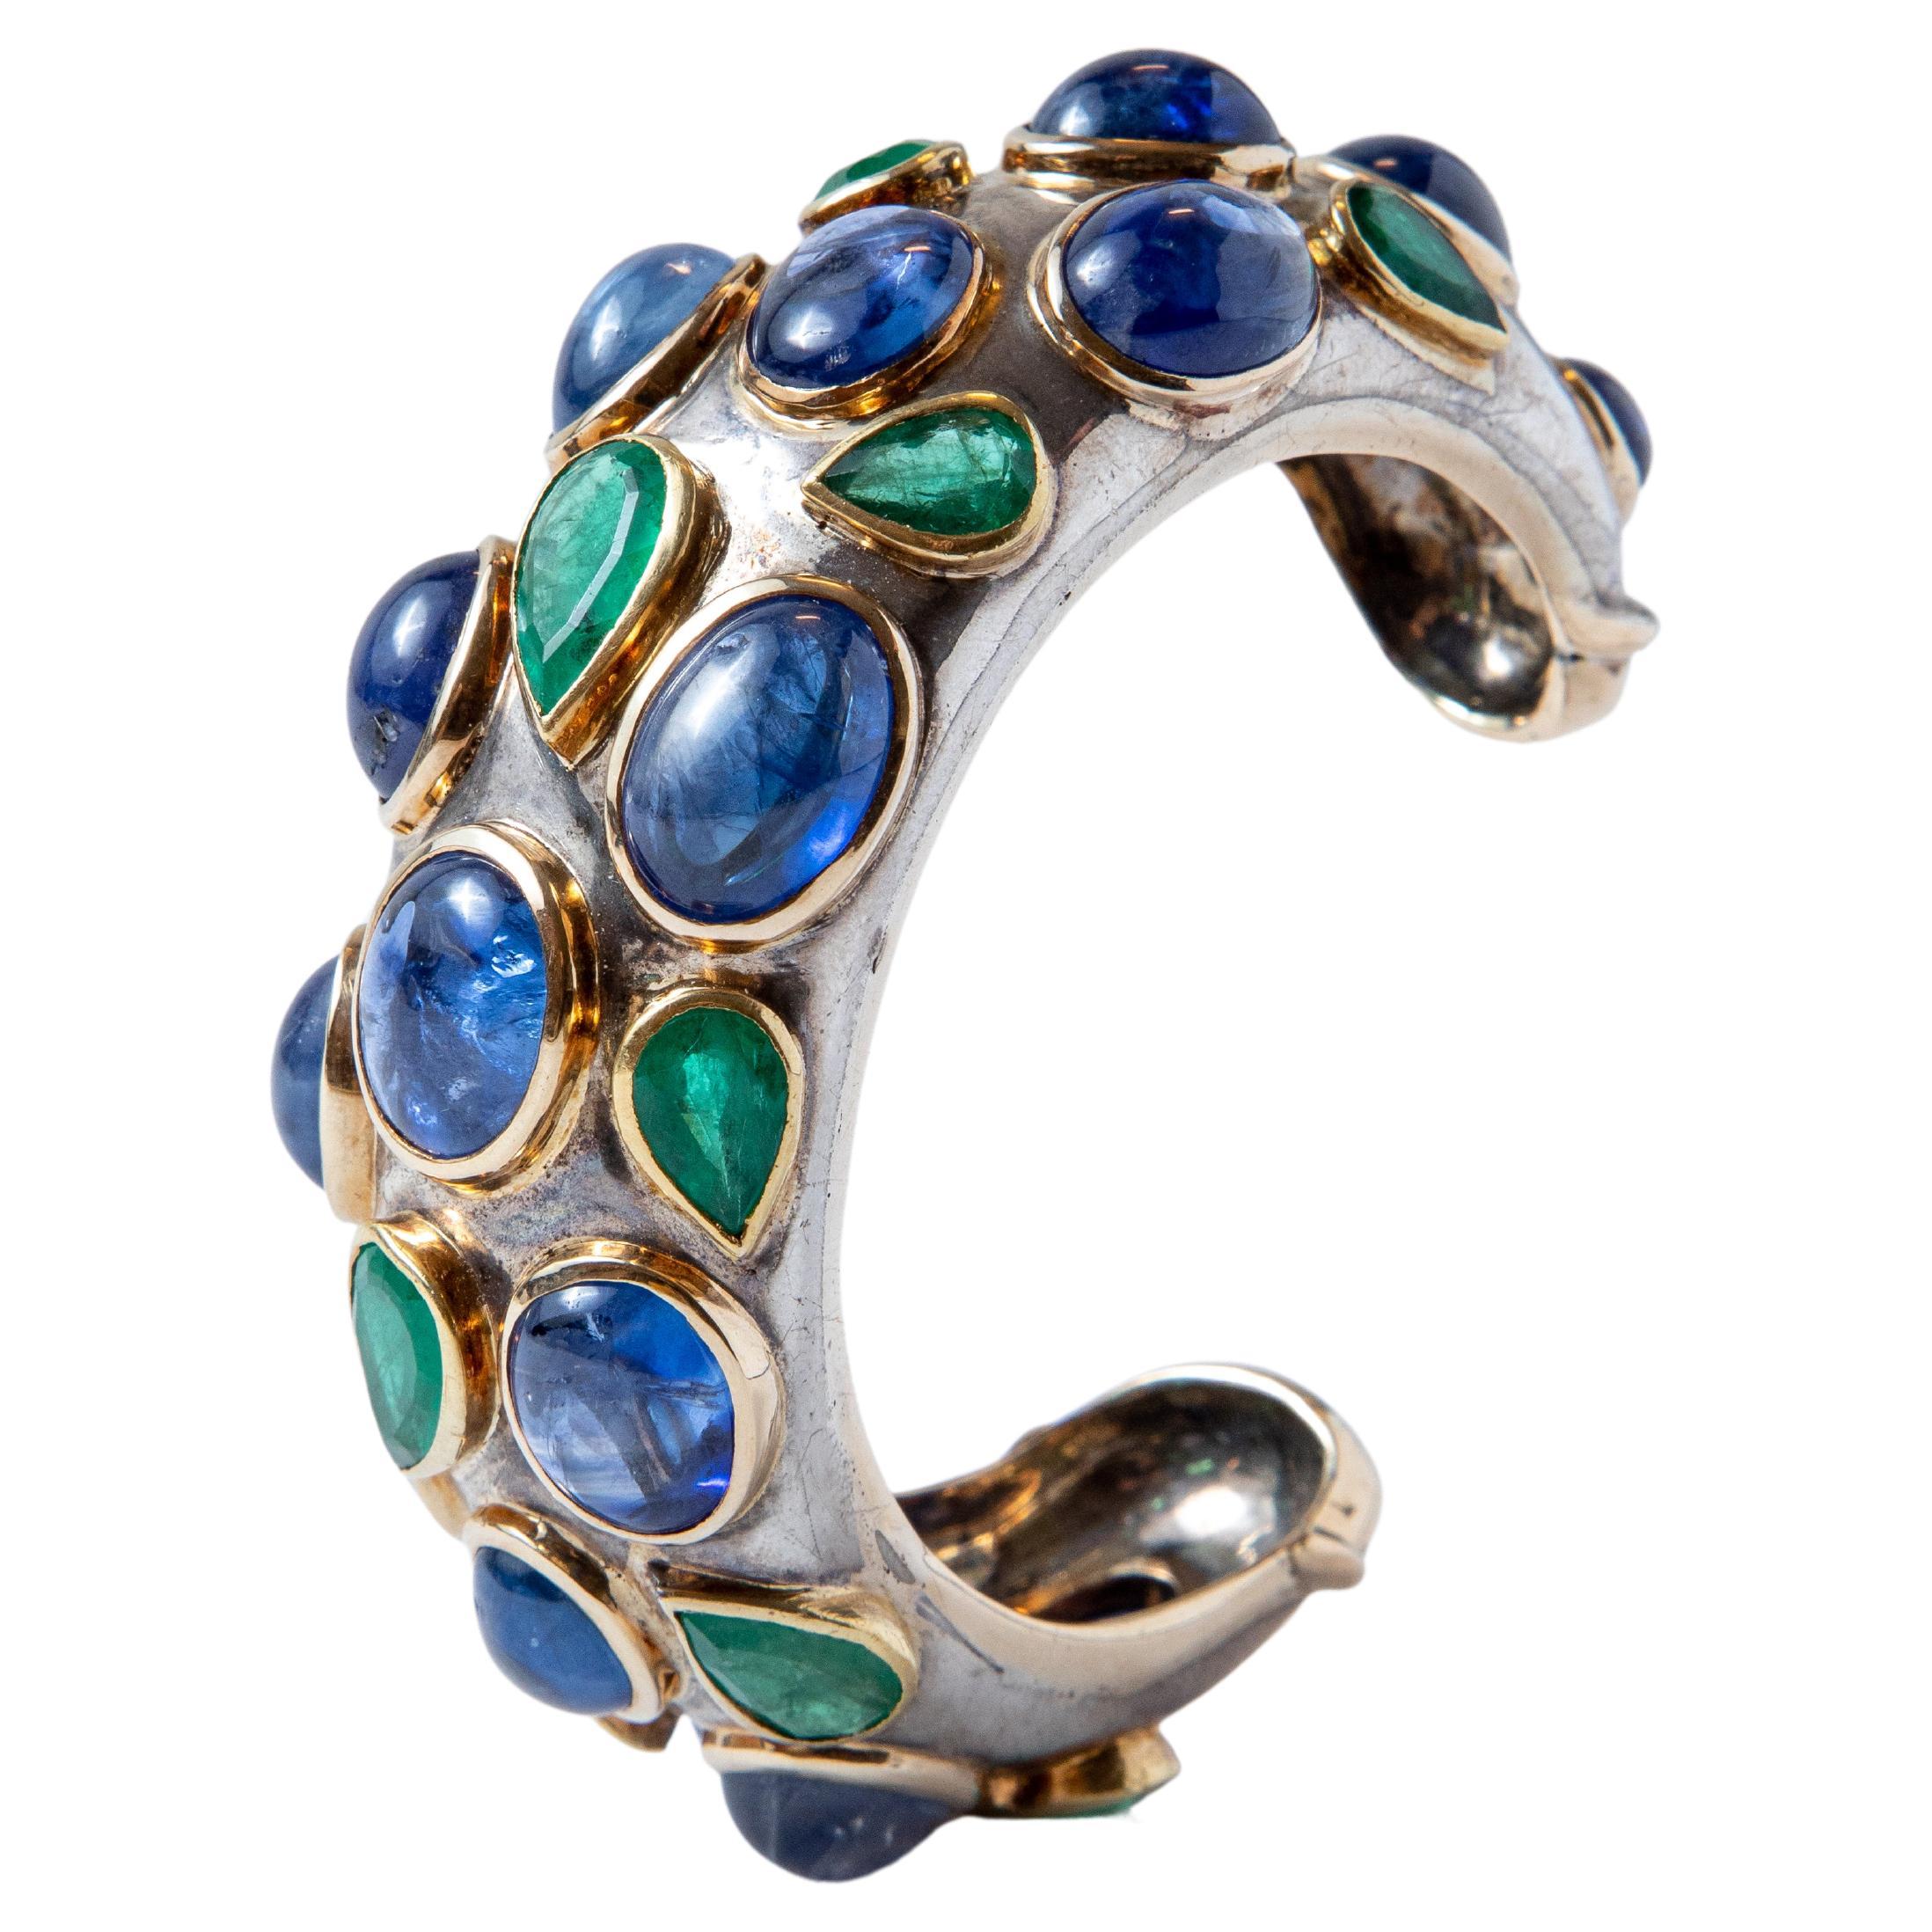 Bracelet in silver, features a multitude of cabochon sapphires and pear-shaped emeralds in 18k yellow gold setting.

Around 1980.

Unsigned, after a drawing and production by Michel Ermelin, jeweler and founder of the Poiray house, attributed to